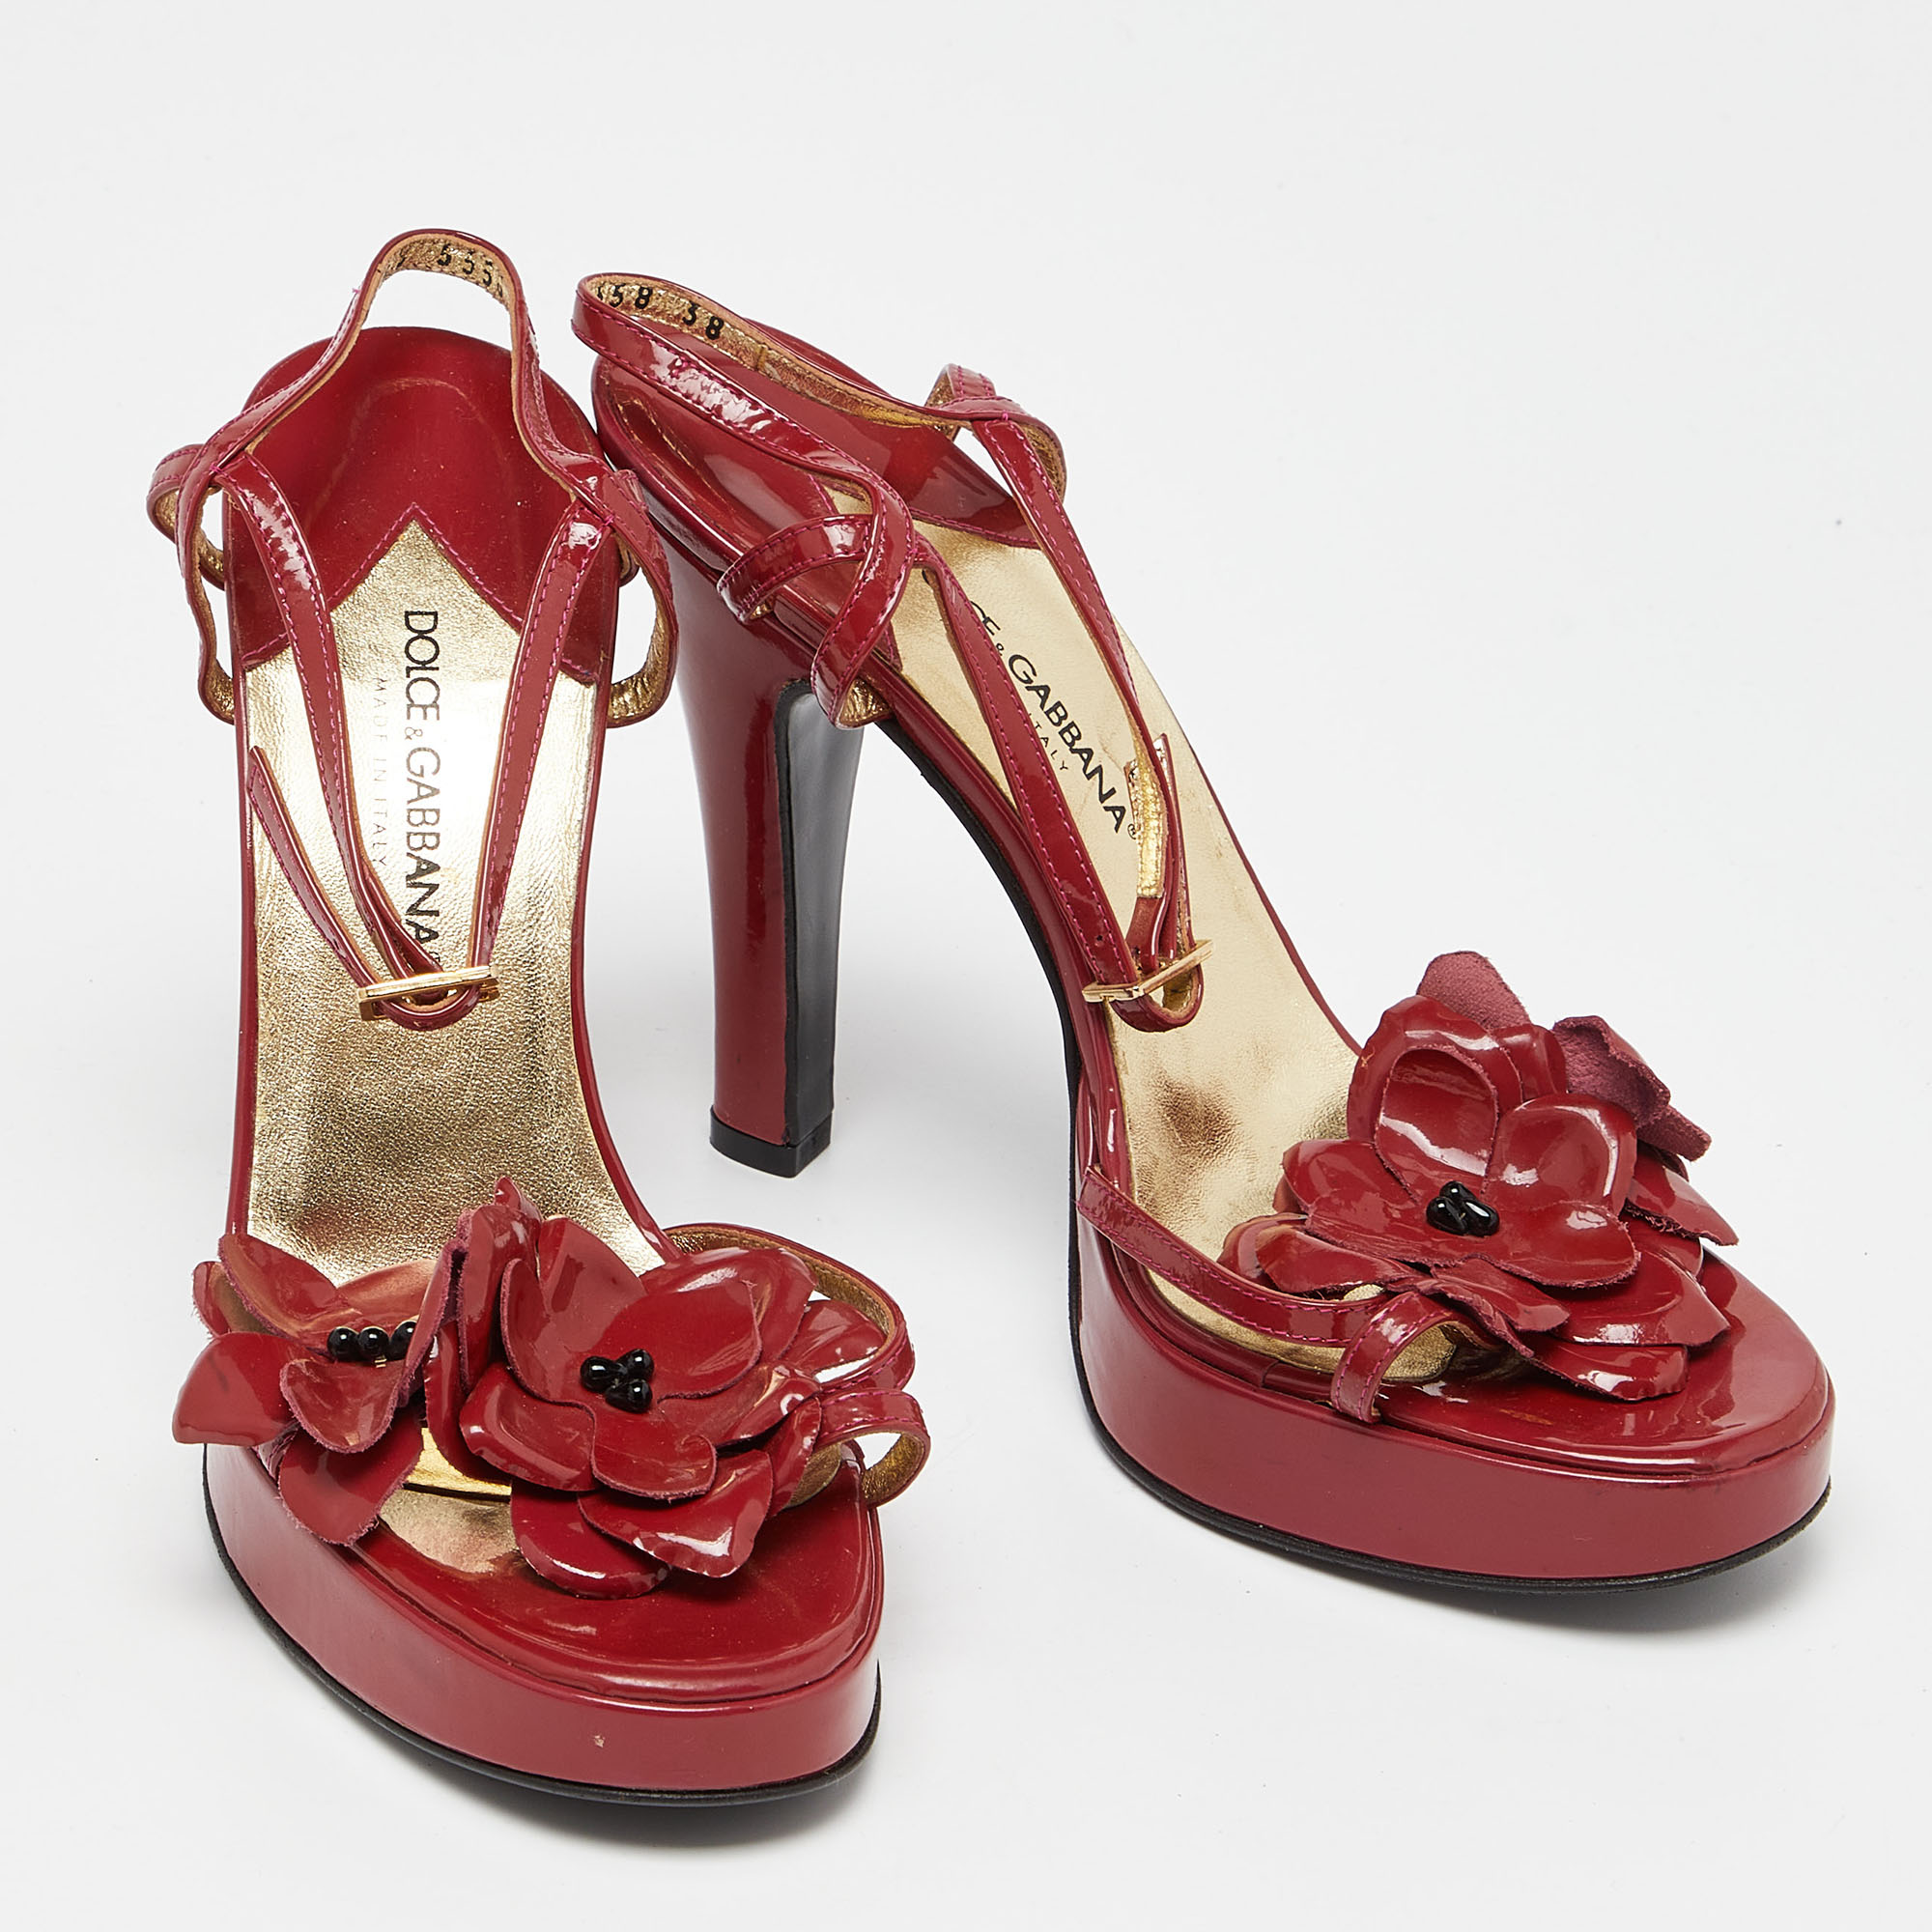 Dolce & Gabbana Red Patent Leather Flower Strappy Sandals Size 38